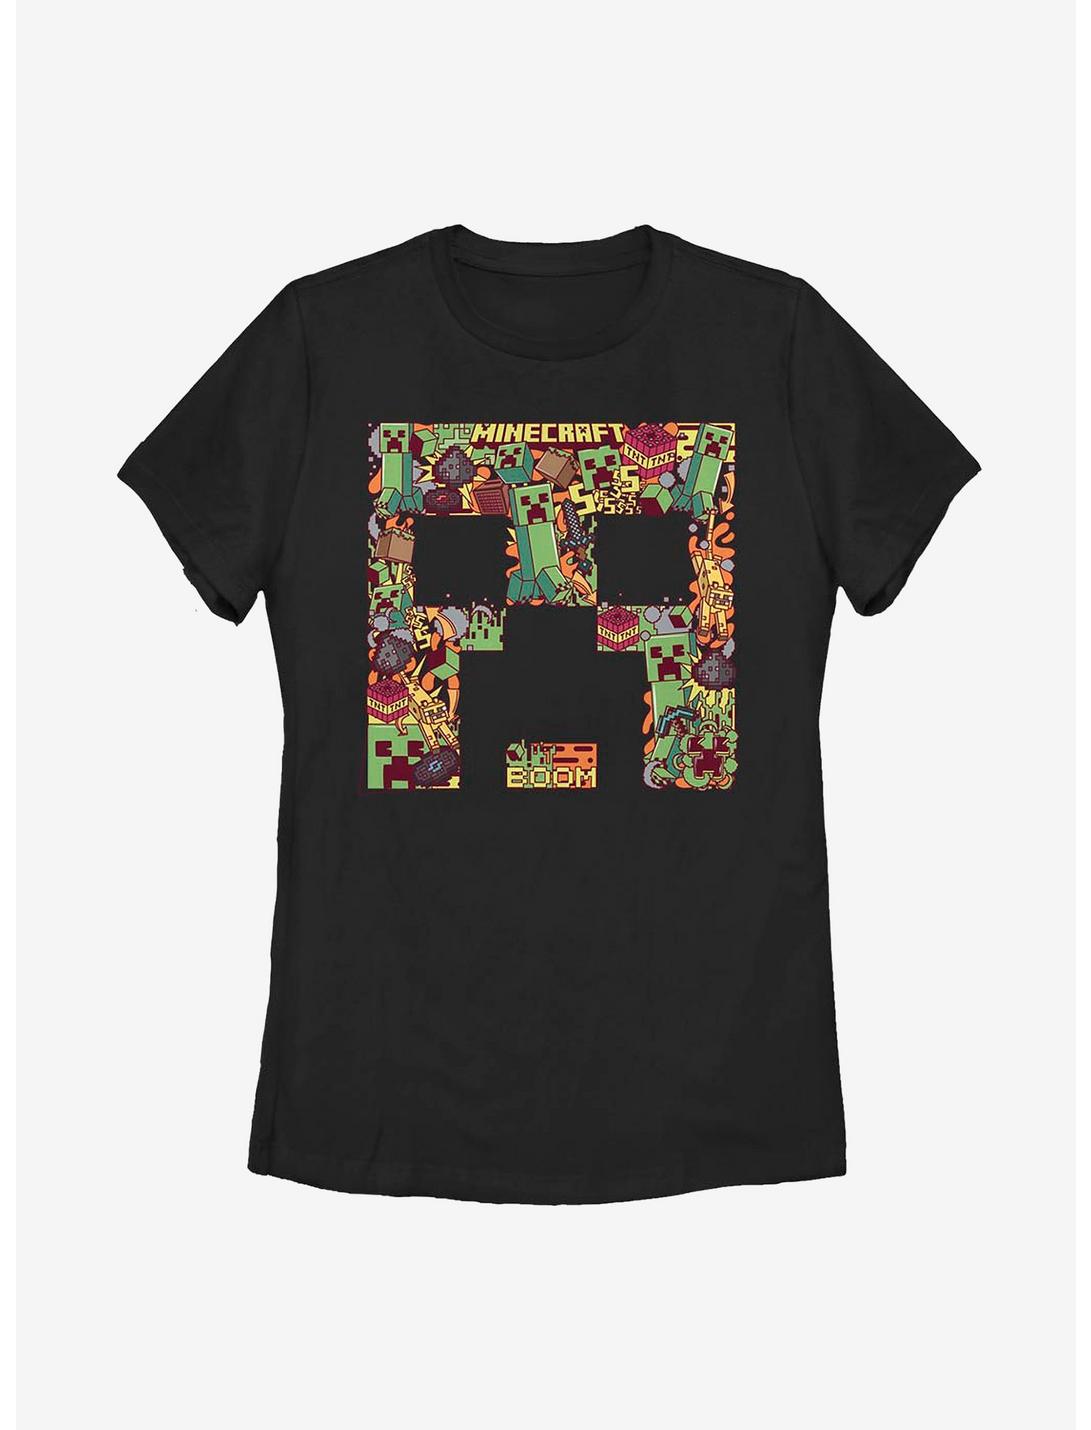 Minecraft Creeper Face Collage Womens T-Shirt, BLACK, hi-res